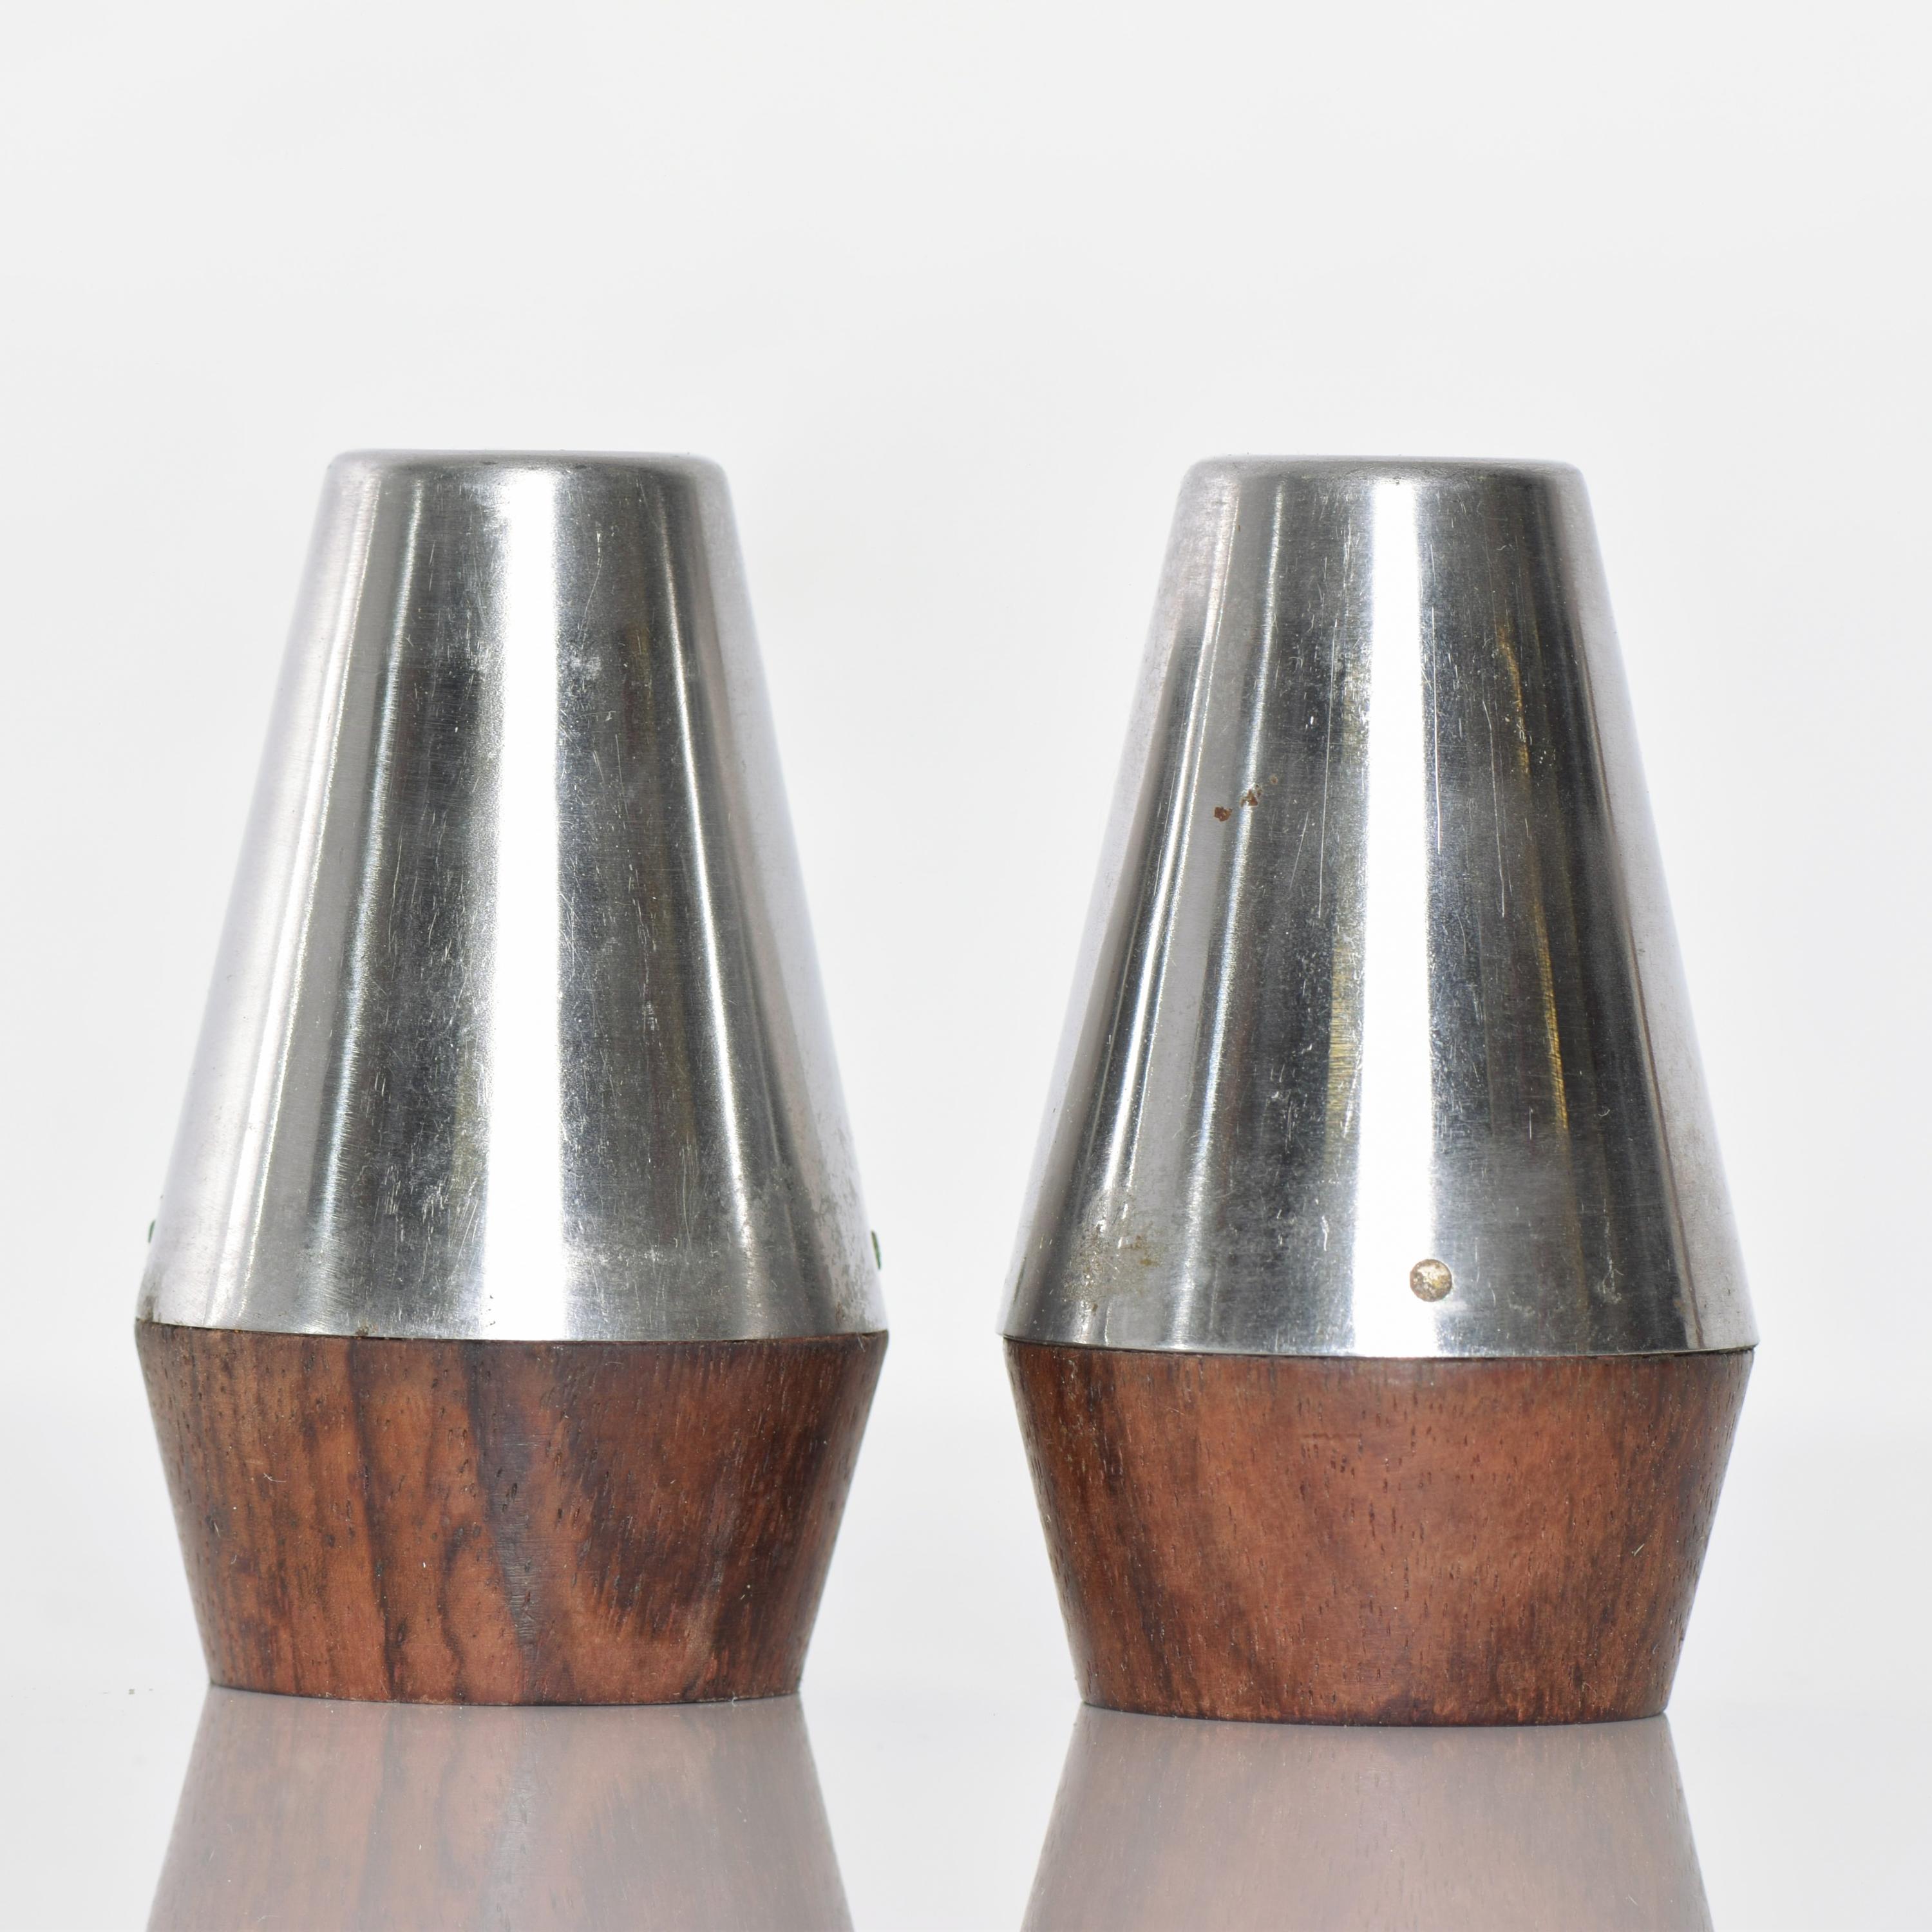 Midcentury Modern design Modern Stainless Steel & Rosewood Salt & Pepper Shaker Set 1960s. 
Made in Japan 
In the style of A & B Lundtofte of Denmark and Dansk Designs.
Measures: 2.75